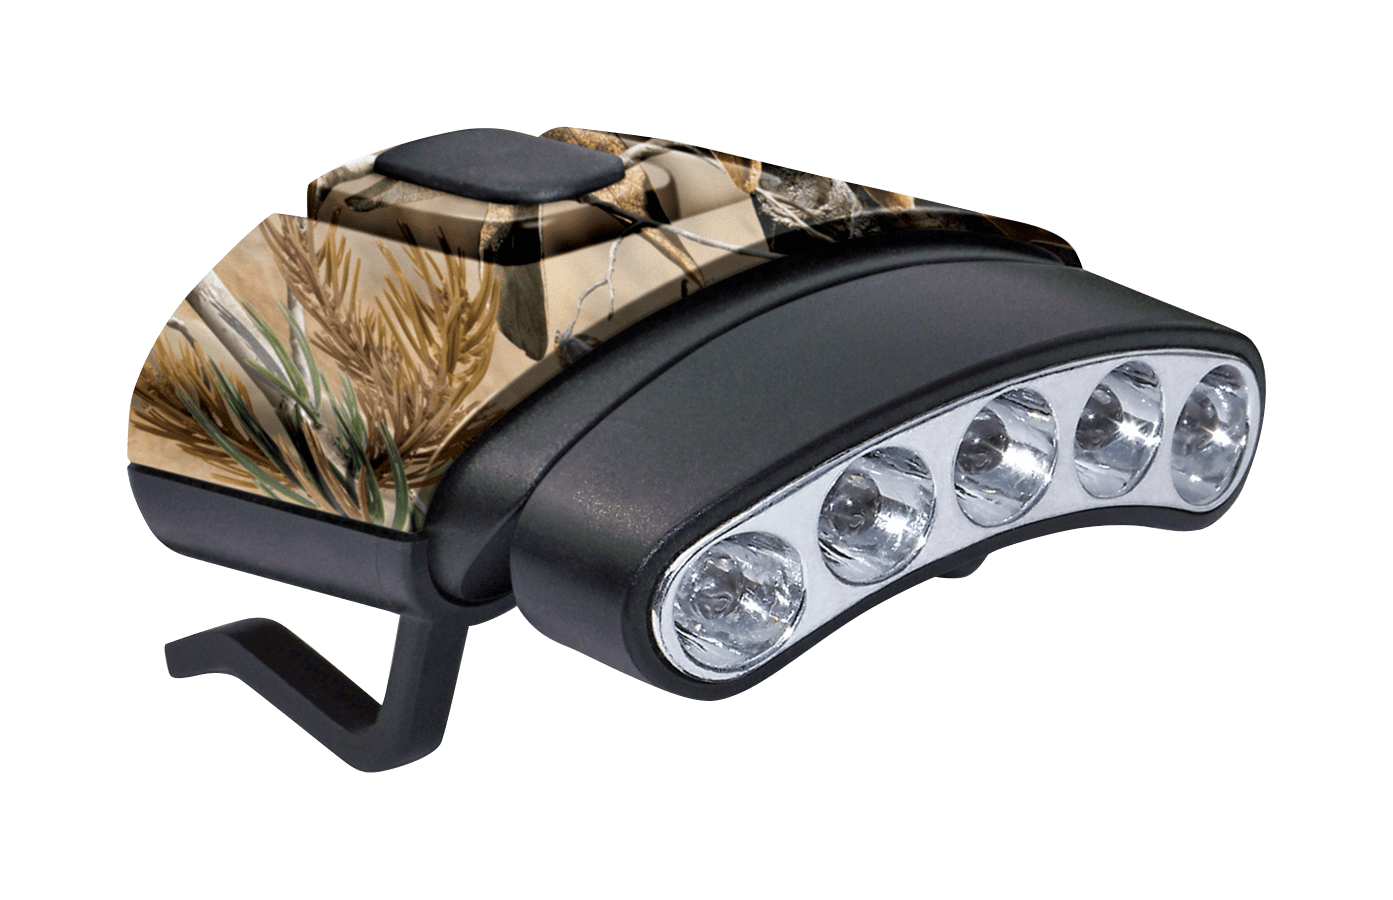 Cyclops Cyclops Orion Tilt Hat Clip Headlamp White Led Nxt Camo General Hunting Accessories